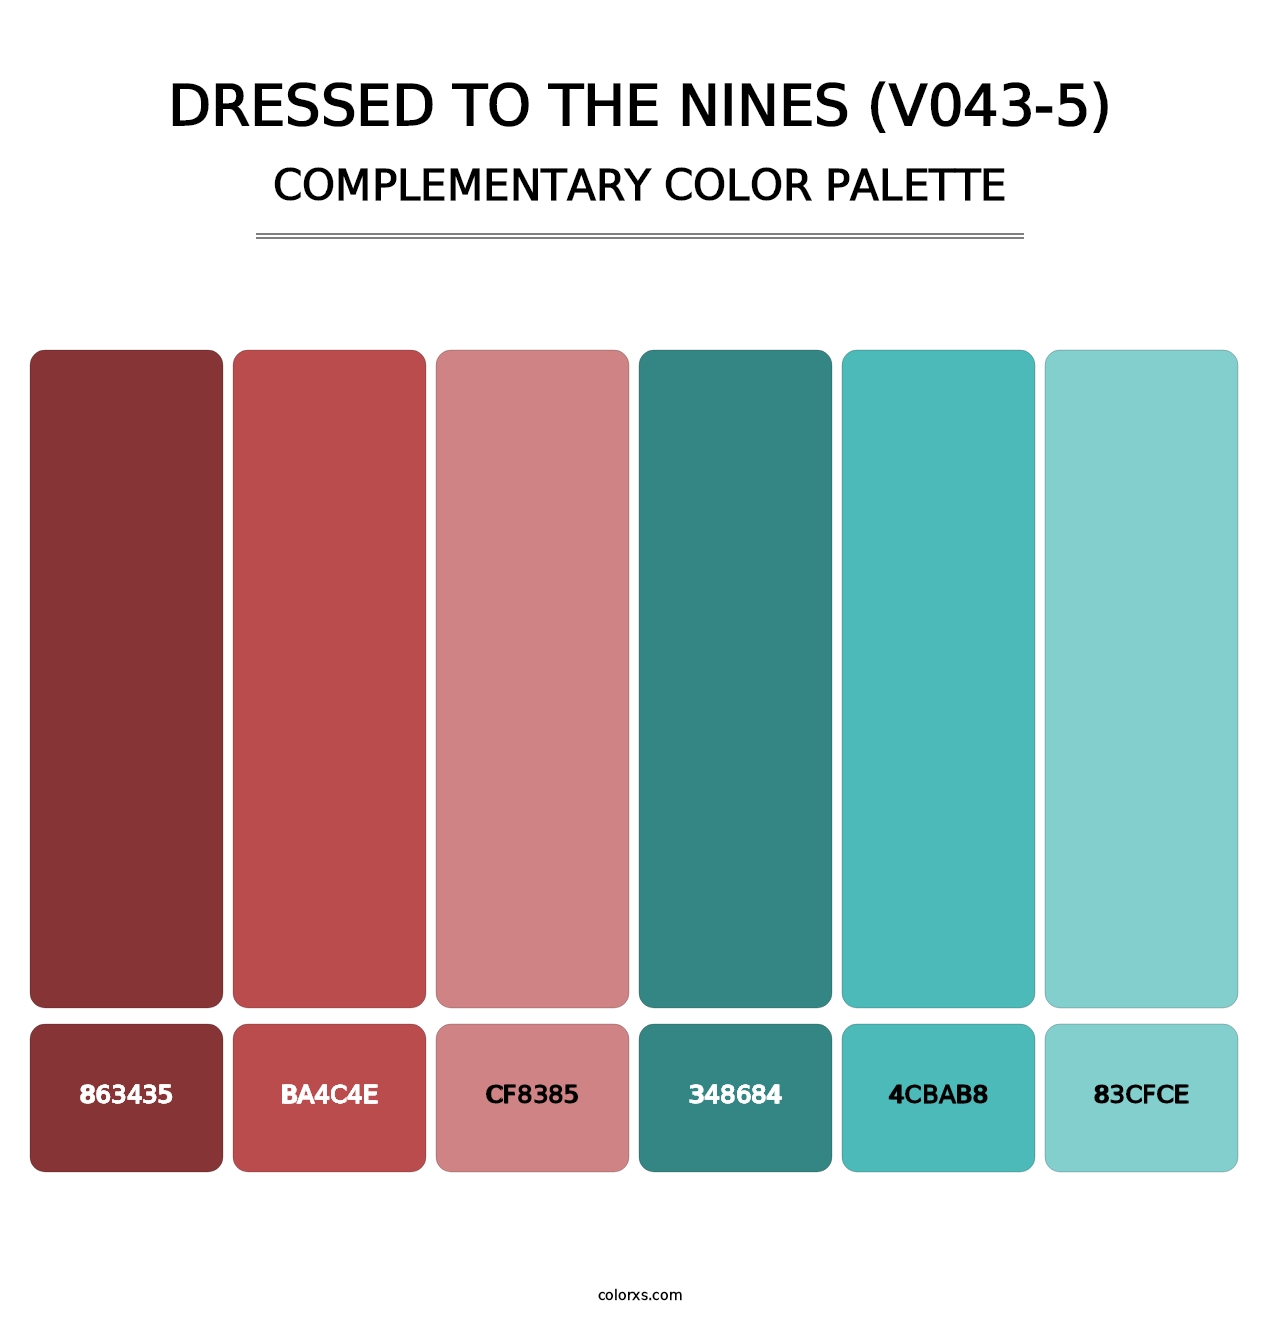 Dressed to the Nines (V043-5) - Complementary Color Palette